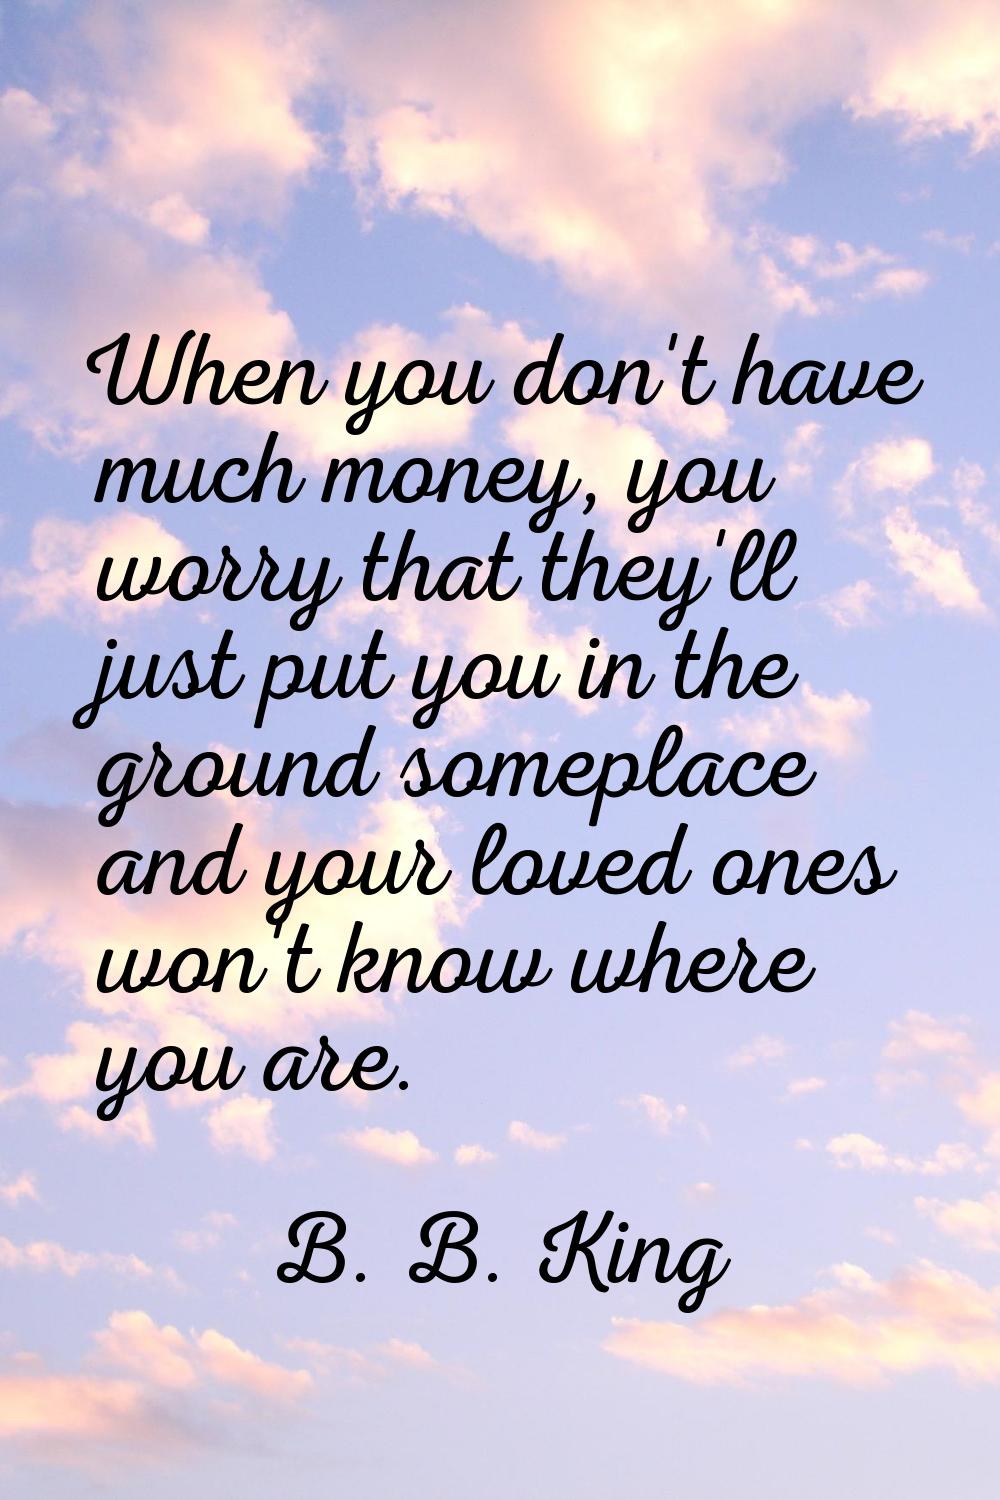 When you don't have much money, you worry that they'll just put you in the ground someplace and you